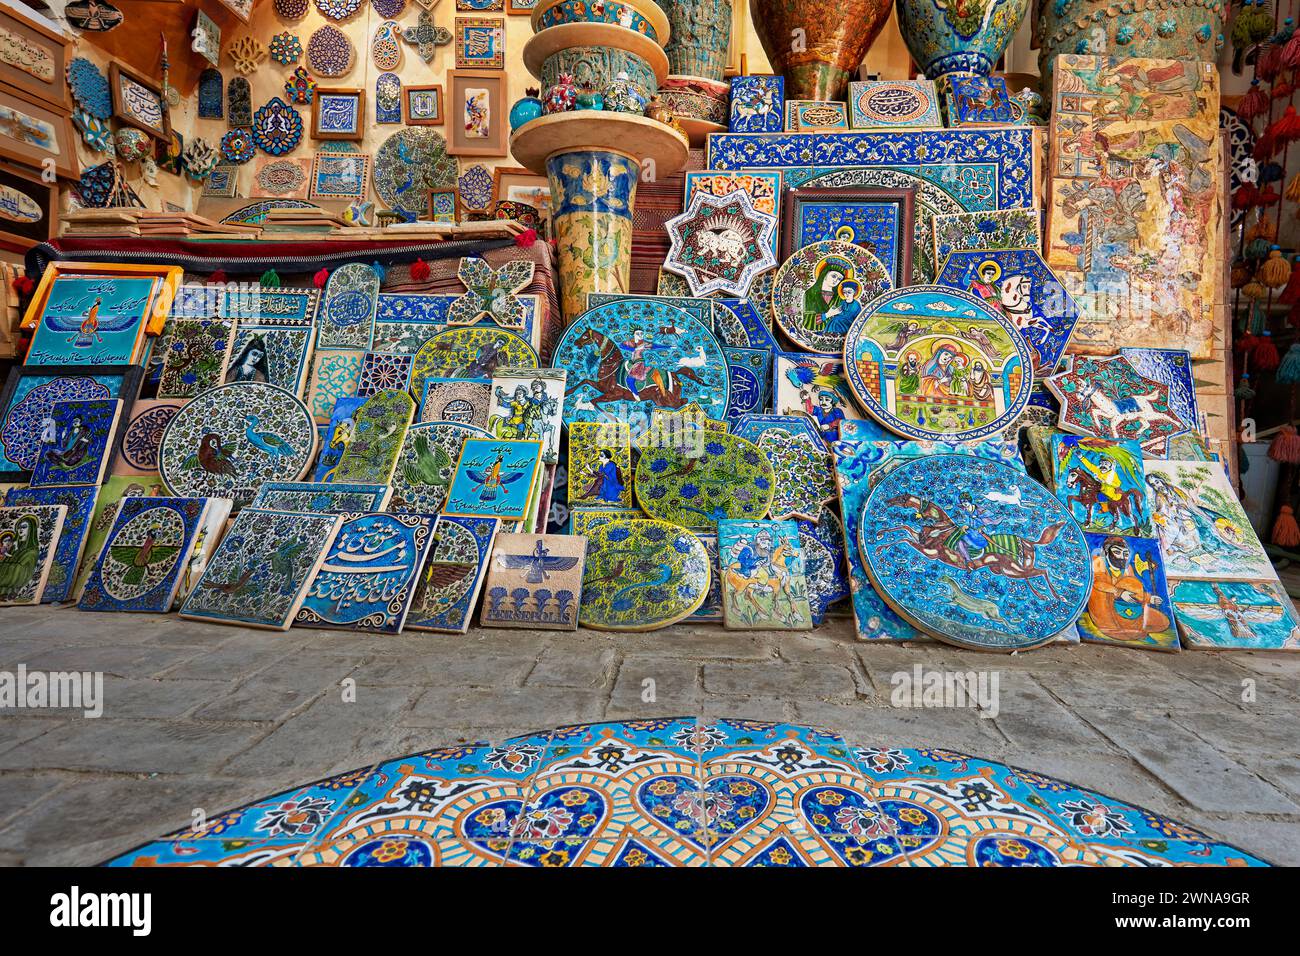 A selection of handmade pottery and ceramics displayed in a gift shop in the historical Fahadan Neighborhood of Yazd, Iran. Stock Photo